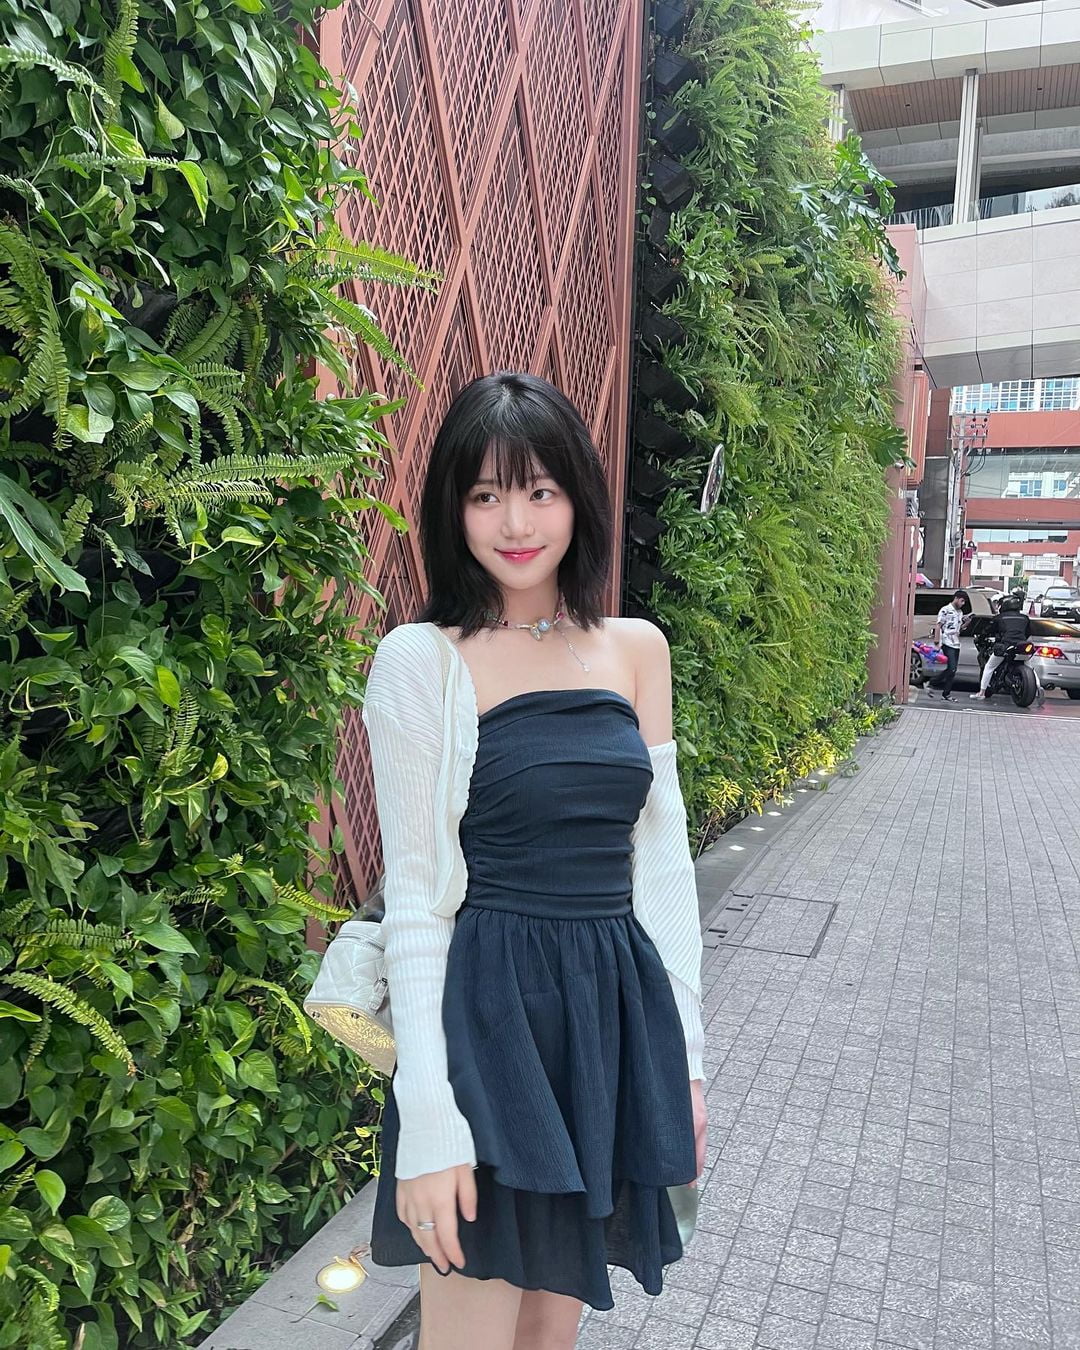 Yubi Lee, showing off her unbelievable youthful beauty at 33 years old... I can debut as an idol